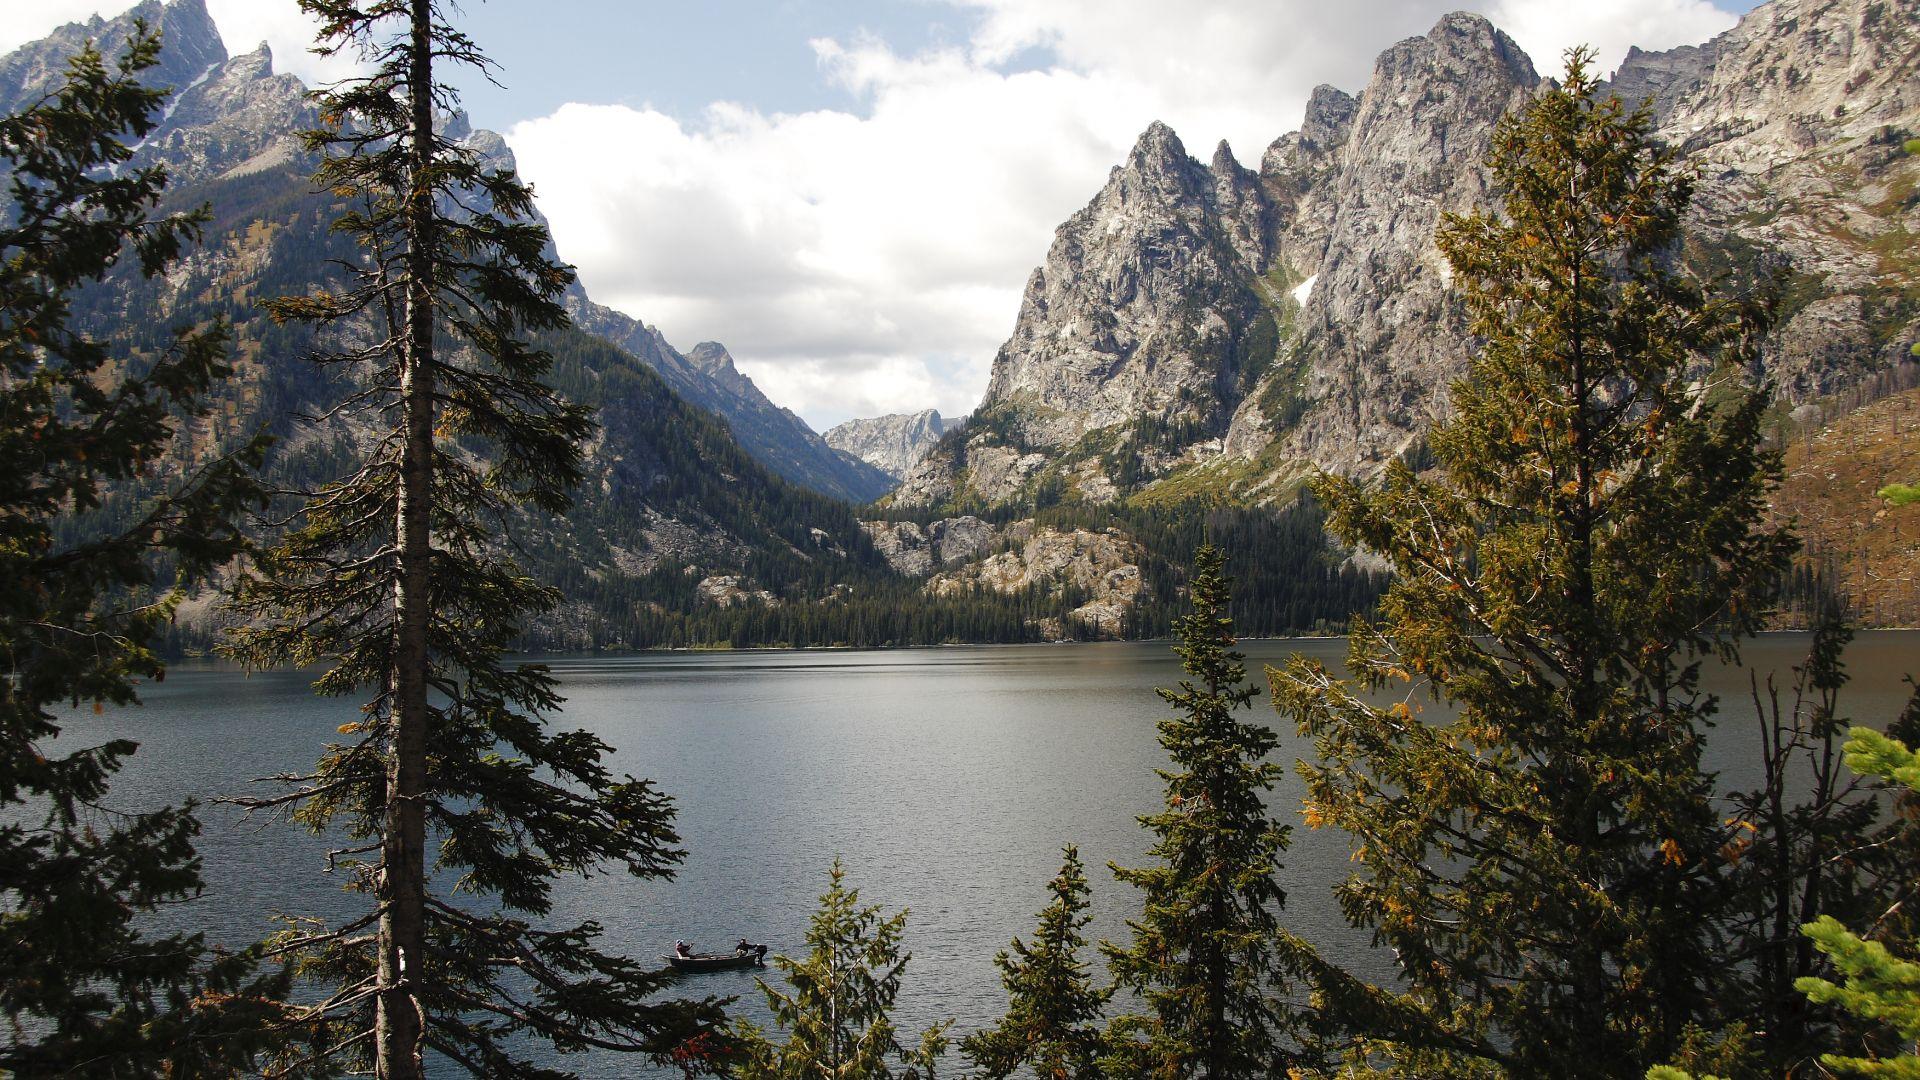 Where to Try Rock Climbing in Jackson Hole & Grand Teton National Park